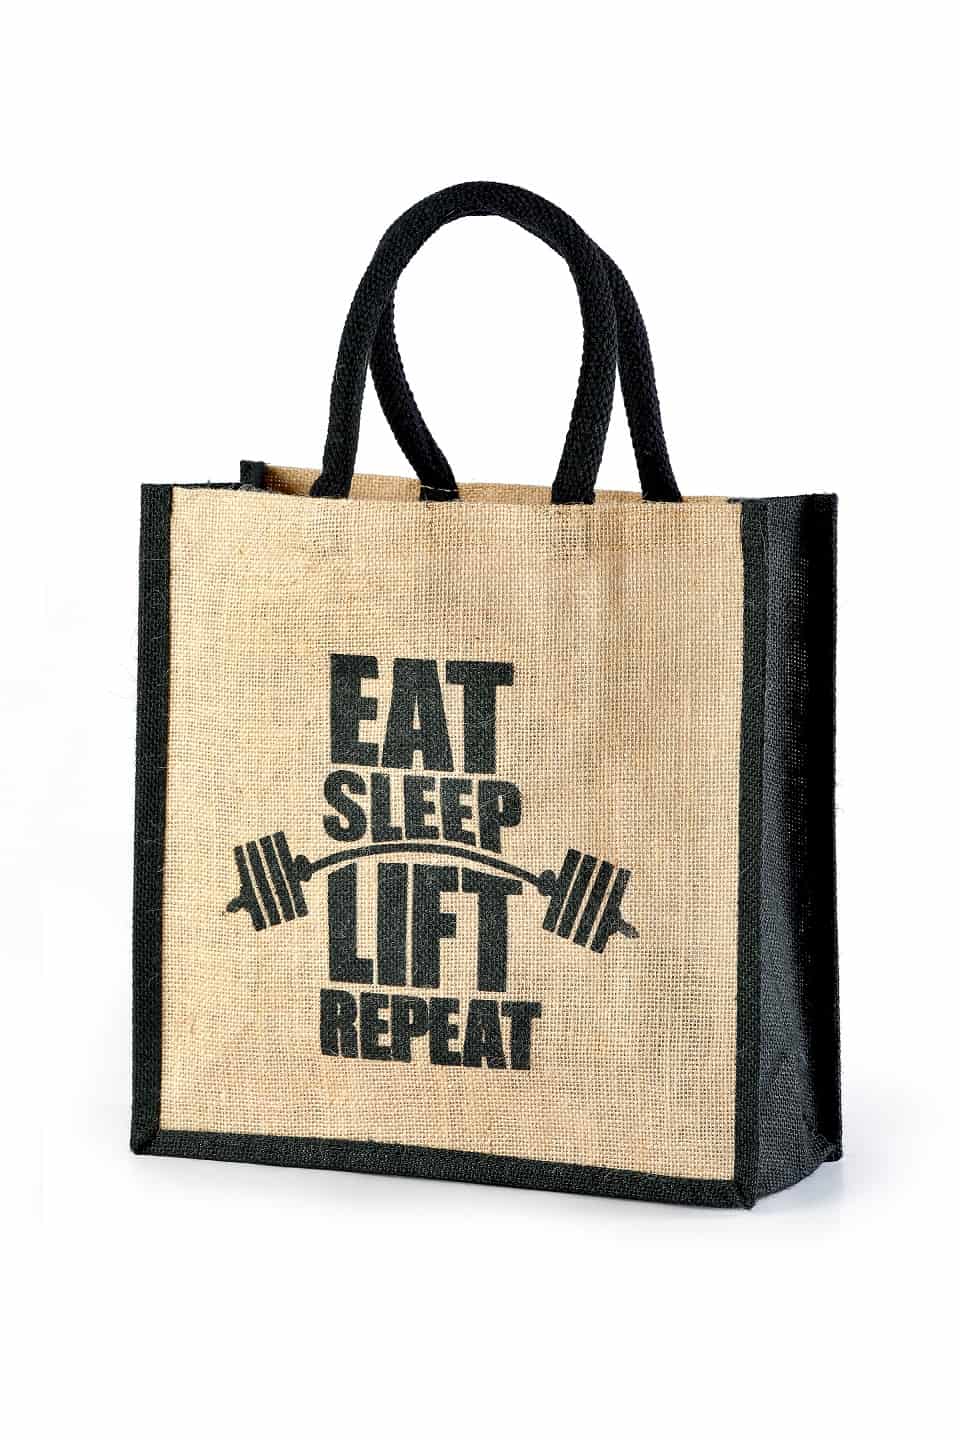 Buy JutePlanet Daily Use Shopper Natural Jute Bags, Jute Beach Bags, Jute  Tote Bags for Shopping & Travel (Pack of 1) at Amazon.in